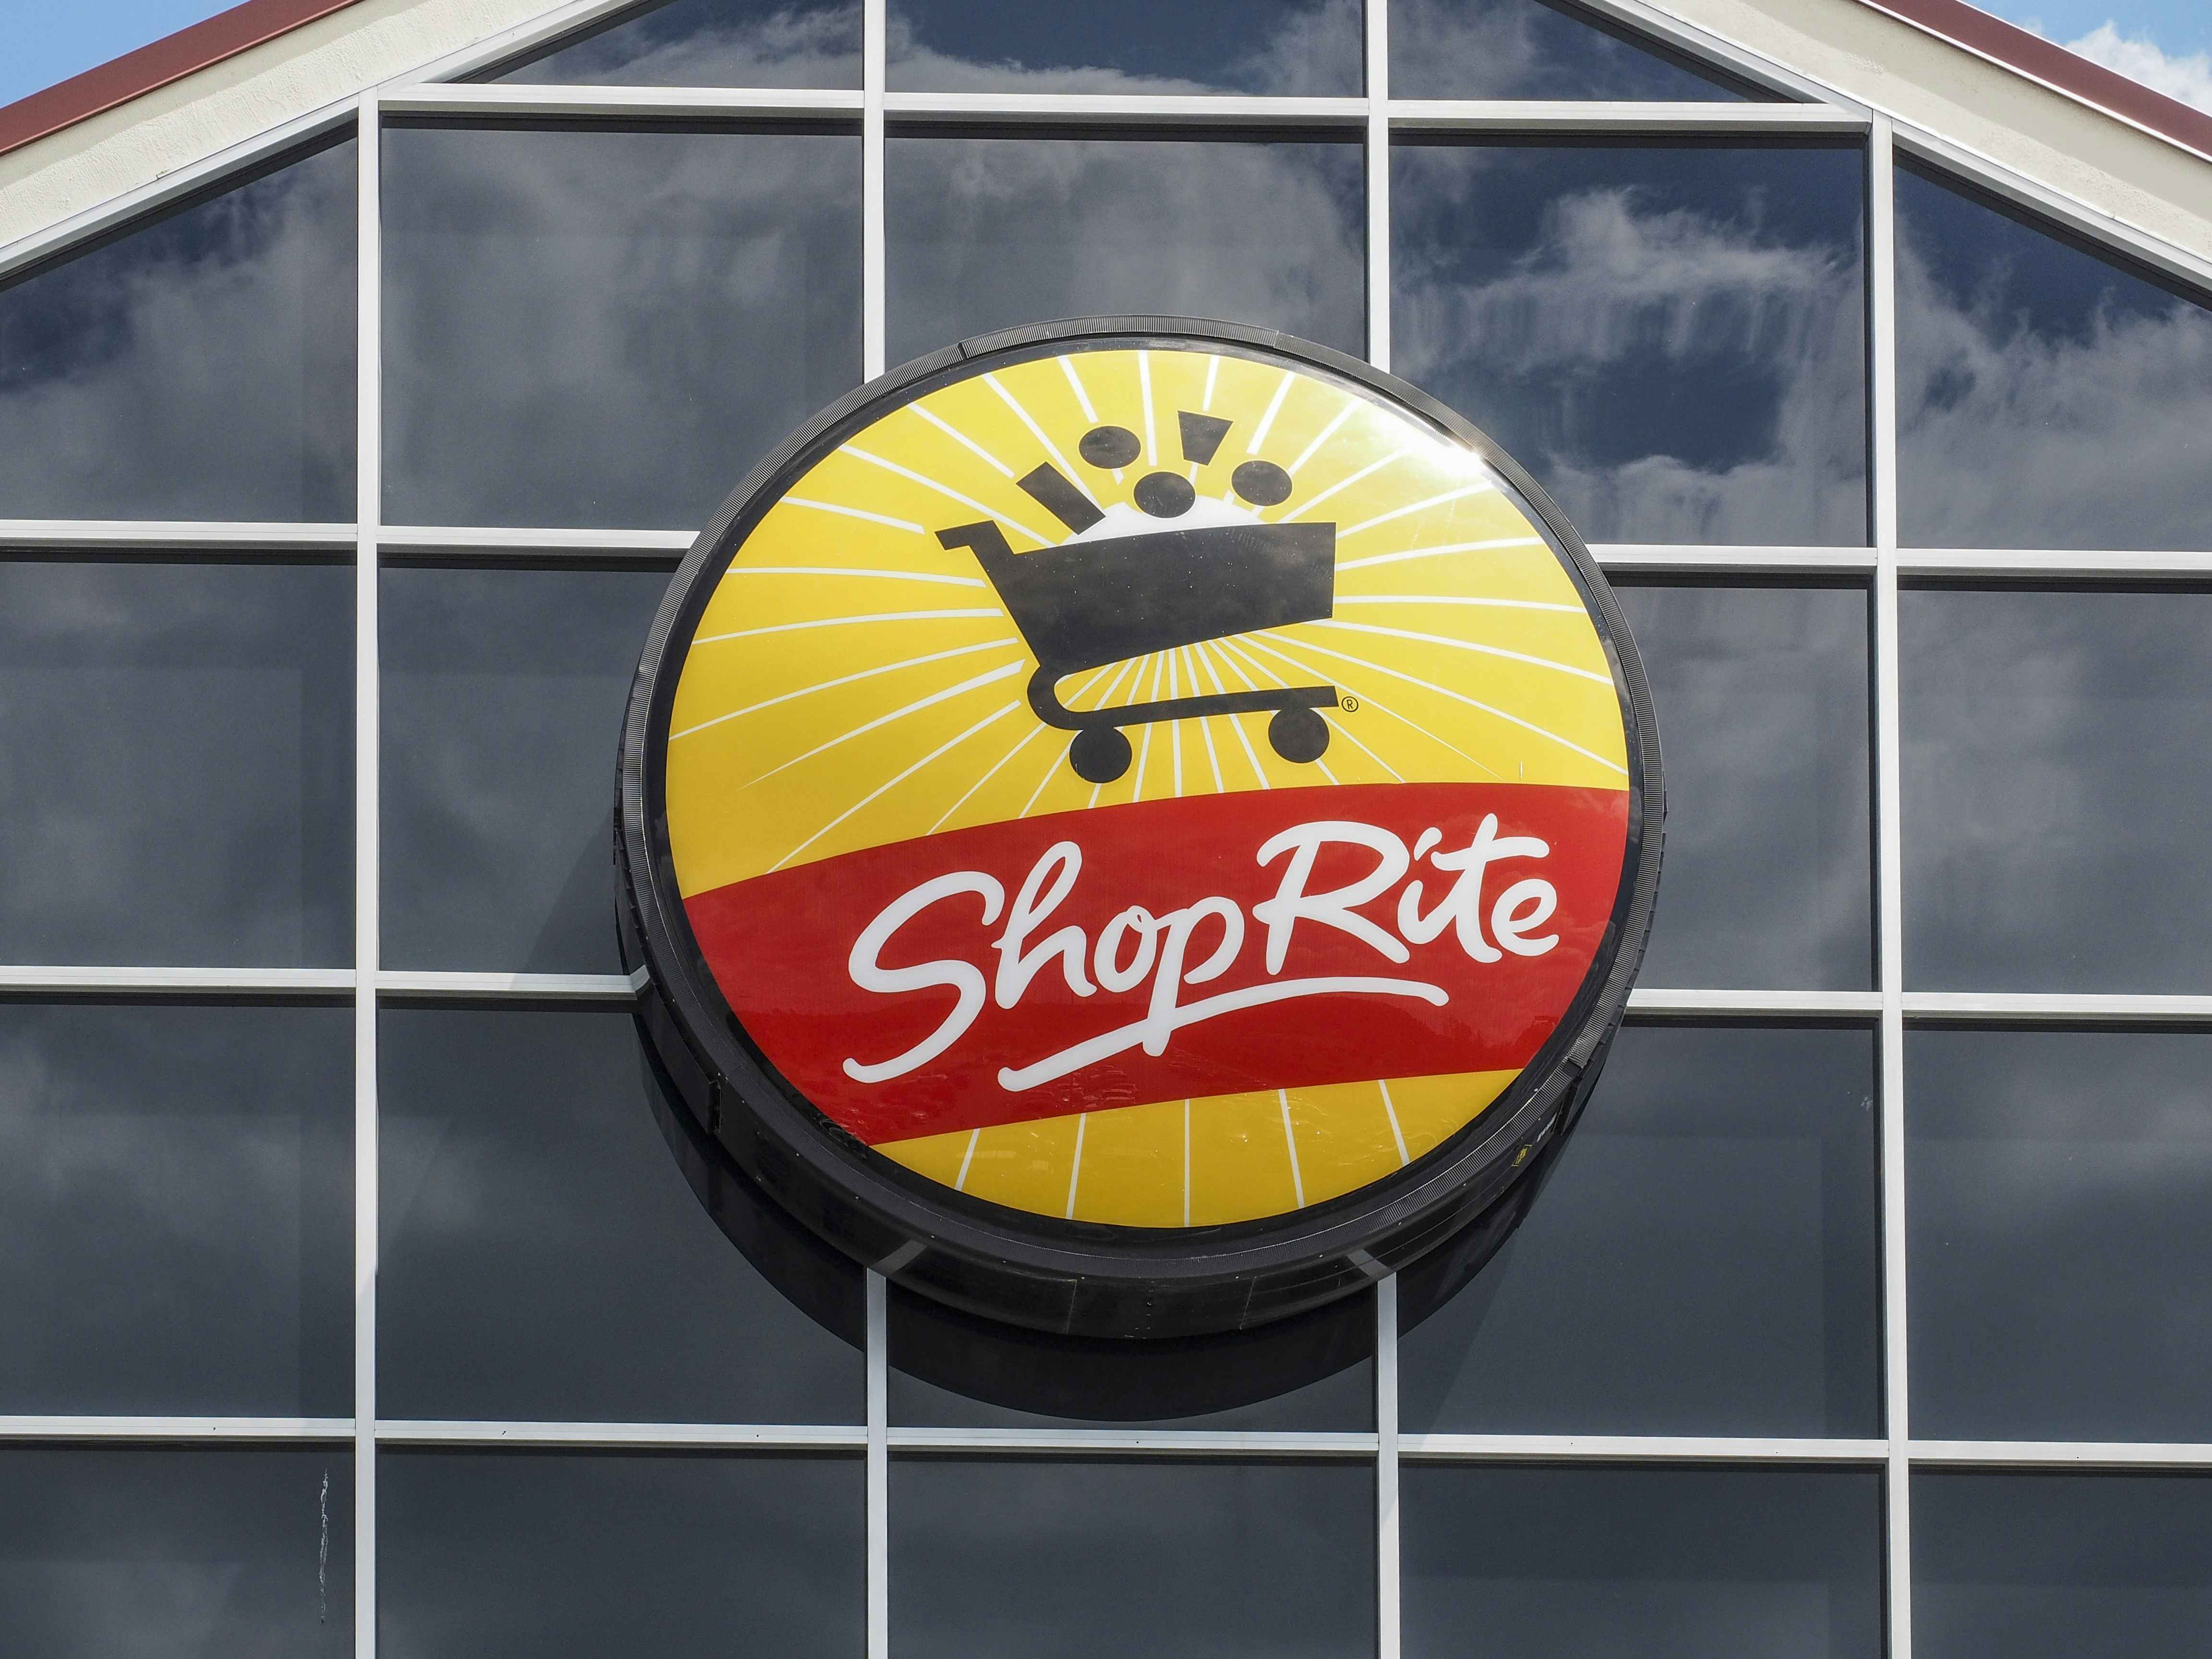 The ShopRite logo on a building